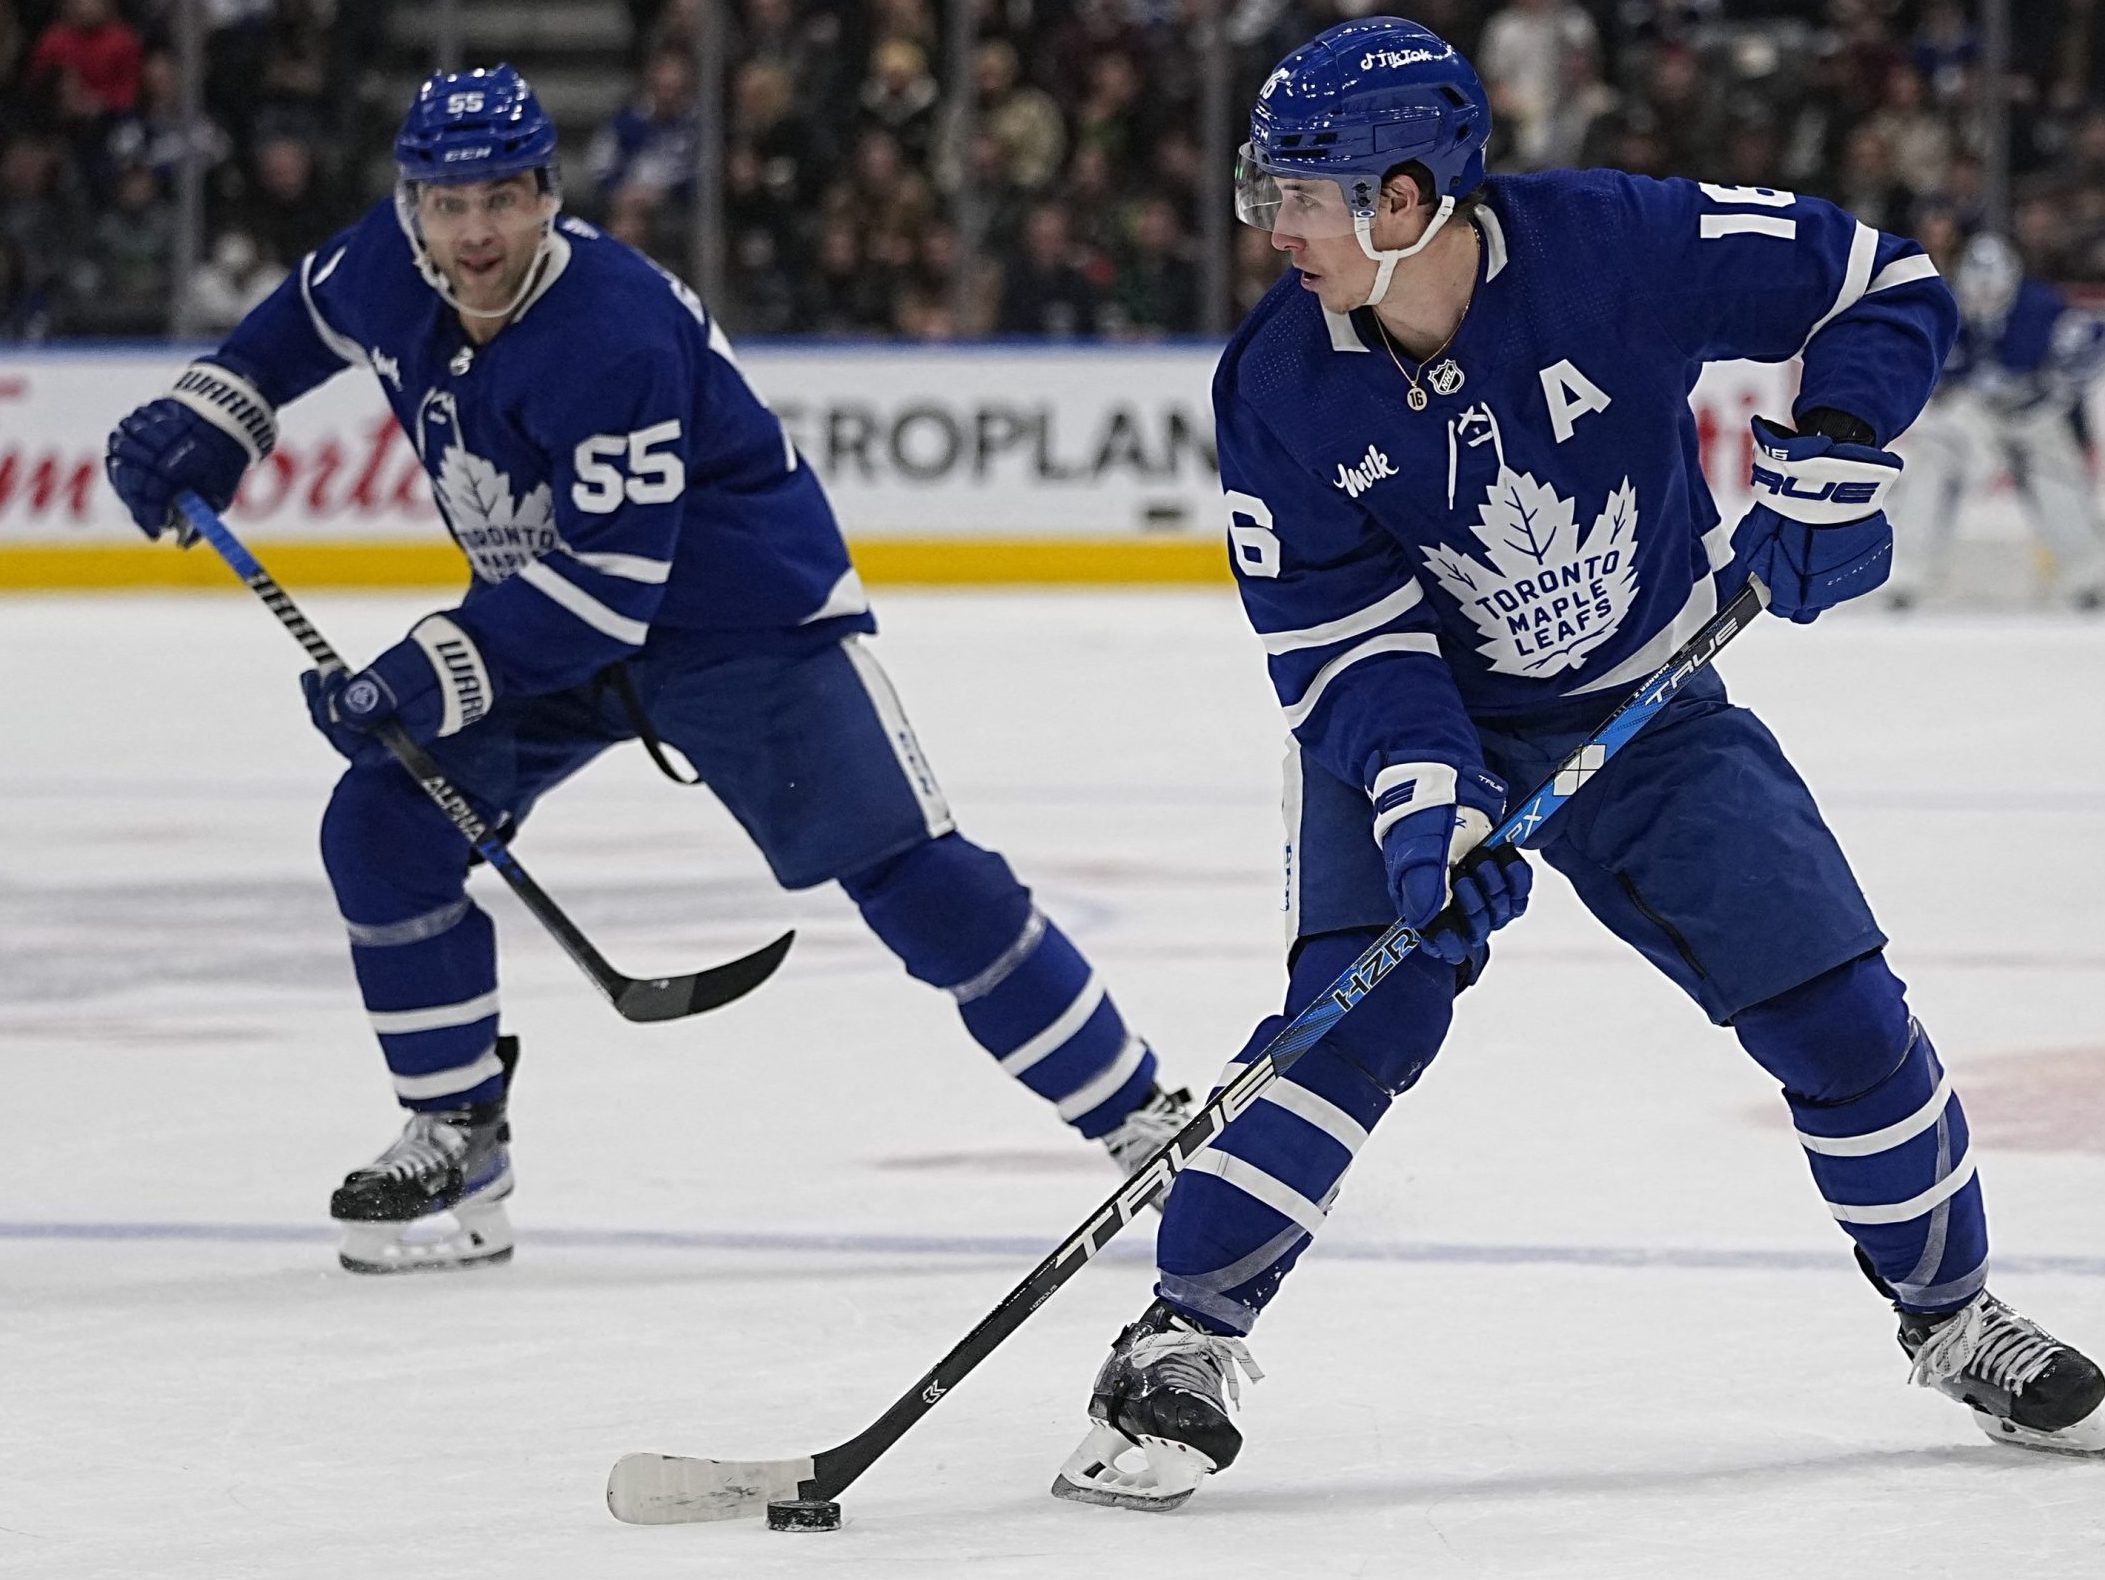 Toronto Maple Leafs on X: We are saddened to learn of the passing